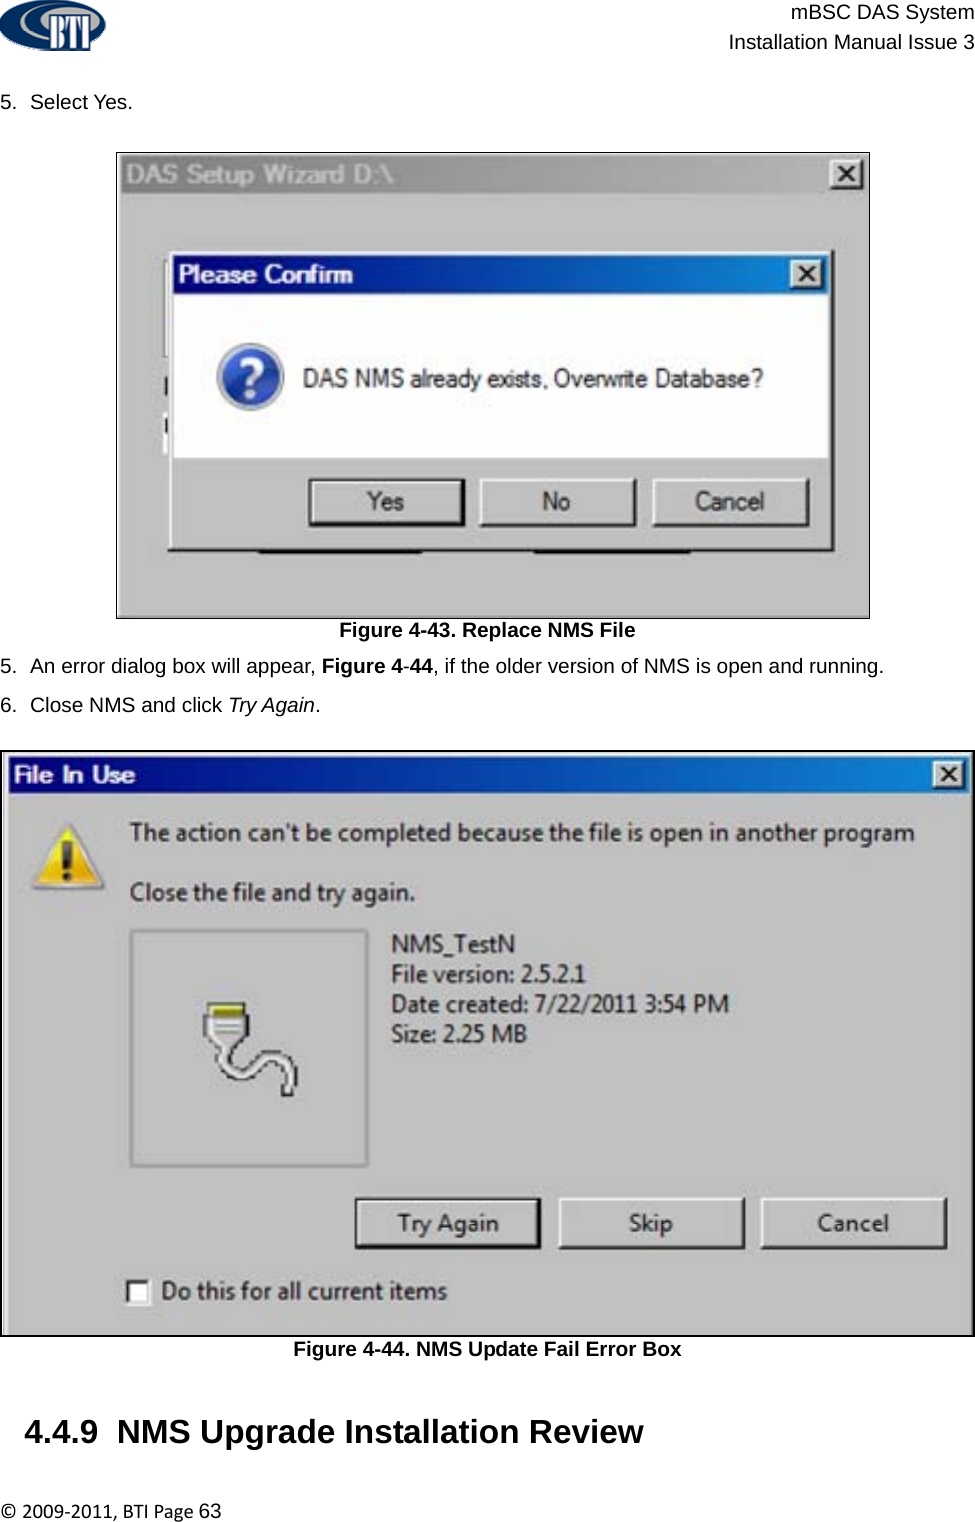                          mBSC DAS System  Installation Manual Issue 3  ©2009‐2011,BTIPage63  5. Select Yes. Figure 4-43. Replace NMS File 5.  An error dialog box will appear, Figure 4-44, if the older version of NMS is open and running. 6.  Close NMS and click Try Again. Figure 4-44. NMS Update Fail Error Box   4.4.9  NMS Upgrade Installation Review   